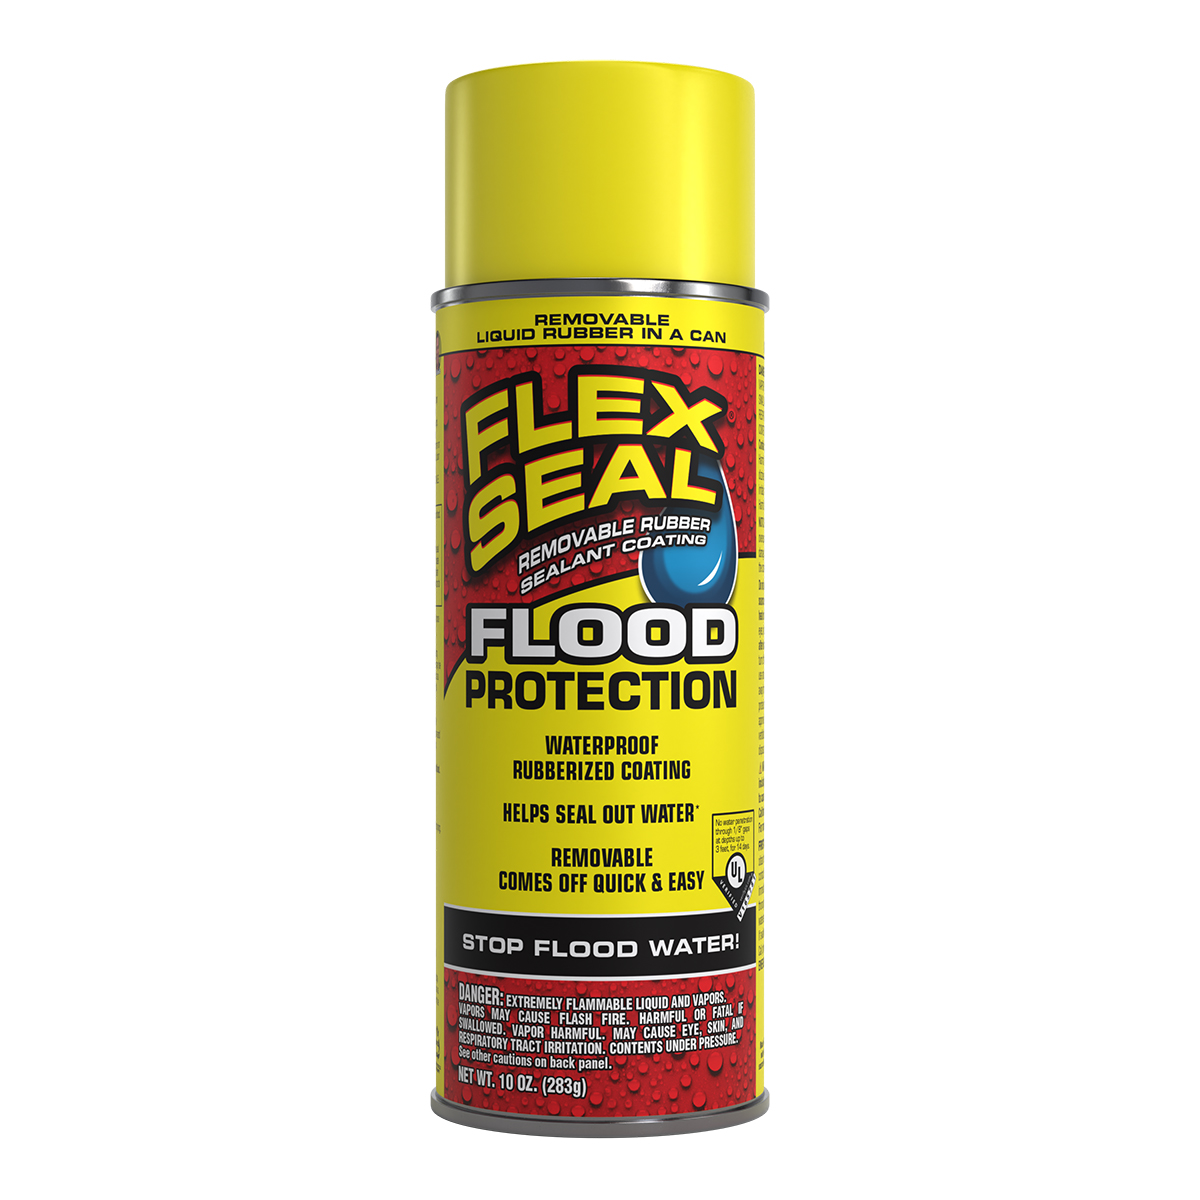 Flex Seal Flood Protection Spray RPSYELR16 - Spray Waterproof Rubberized Coating Flood Sealant Waterproof Removeable Easy-Apply 